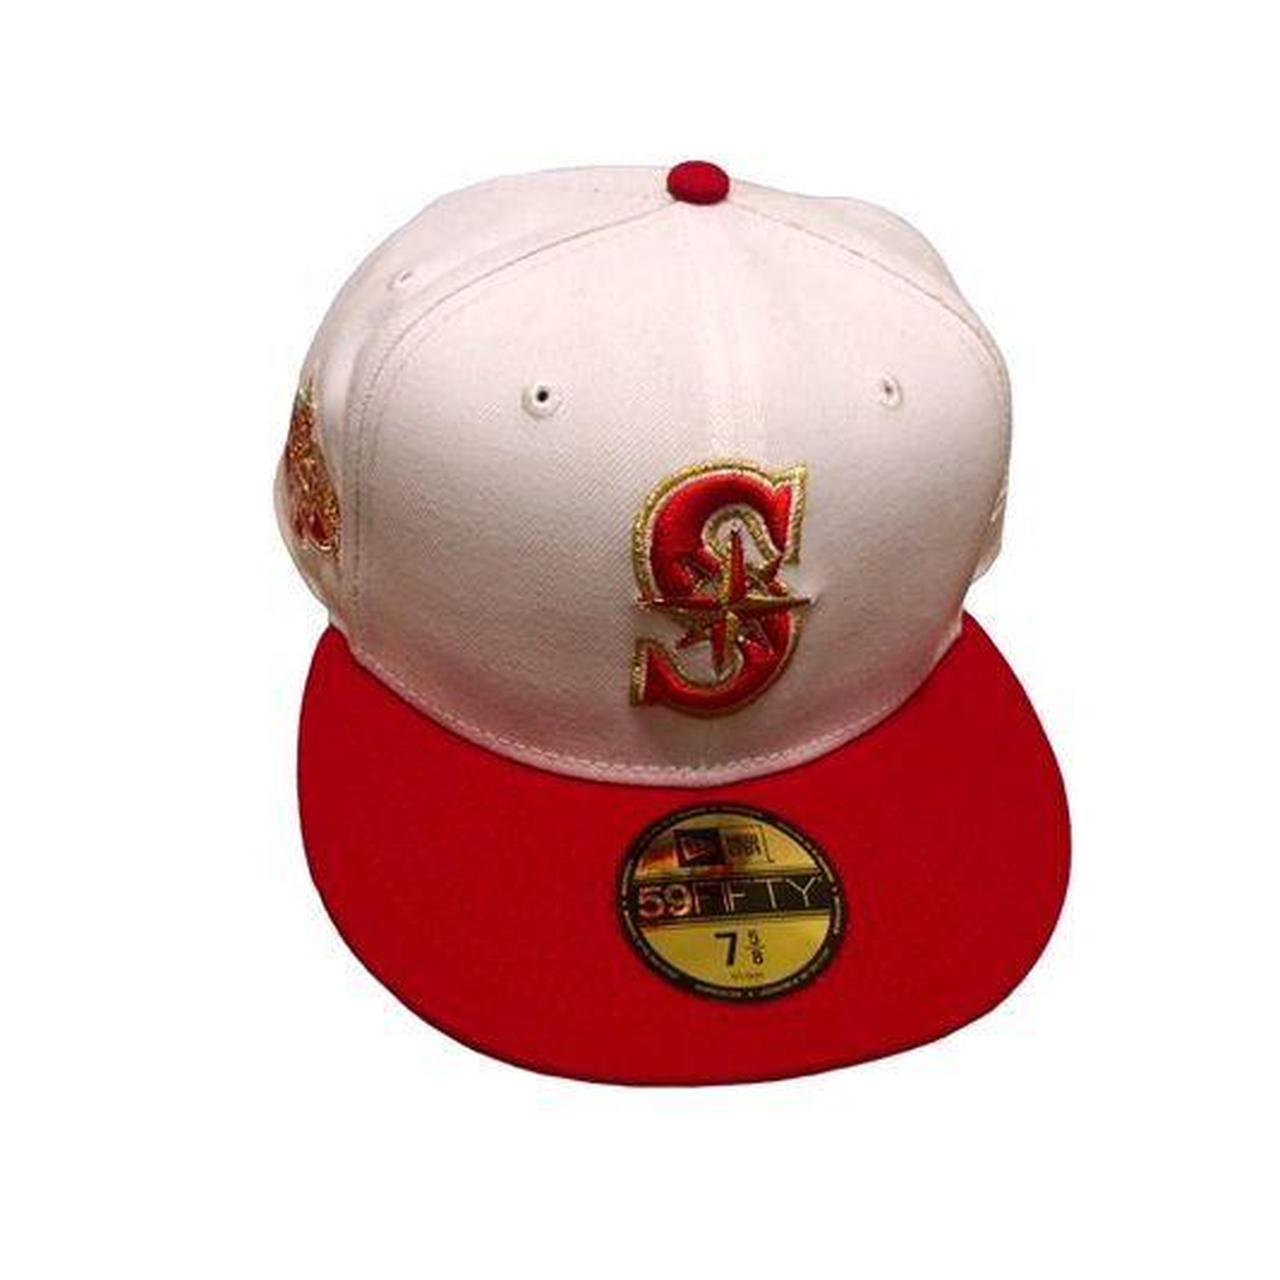 Men's New Era Red Seattle Mariners Logo White 59FIFTY Fitted Hat